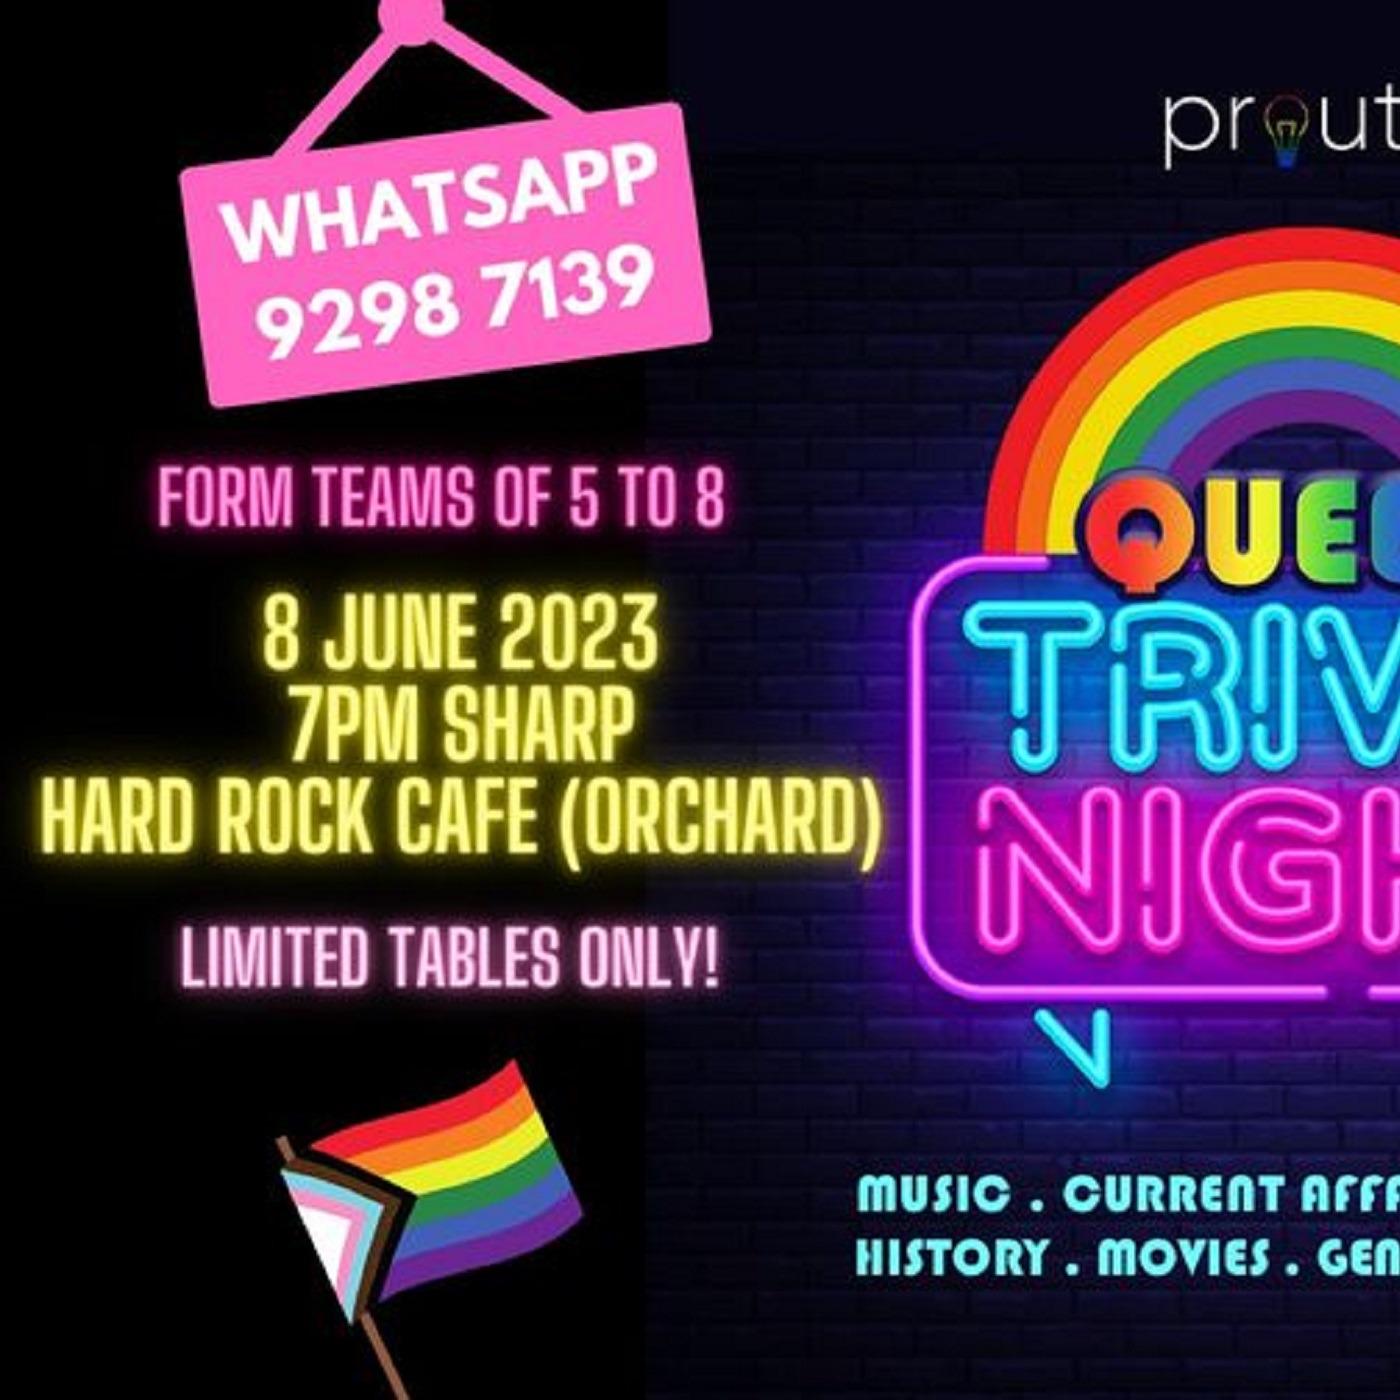 QUEER TRIVIA NIGHT SG: PRIDE FEVER WITH PREETIPLS